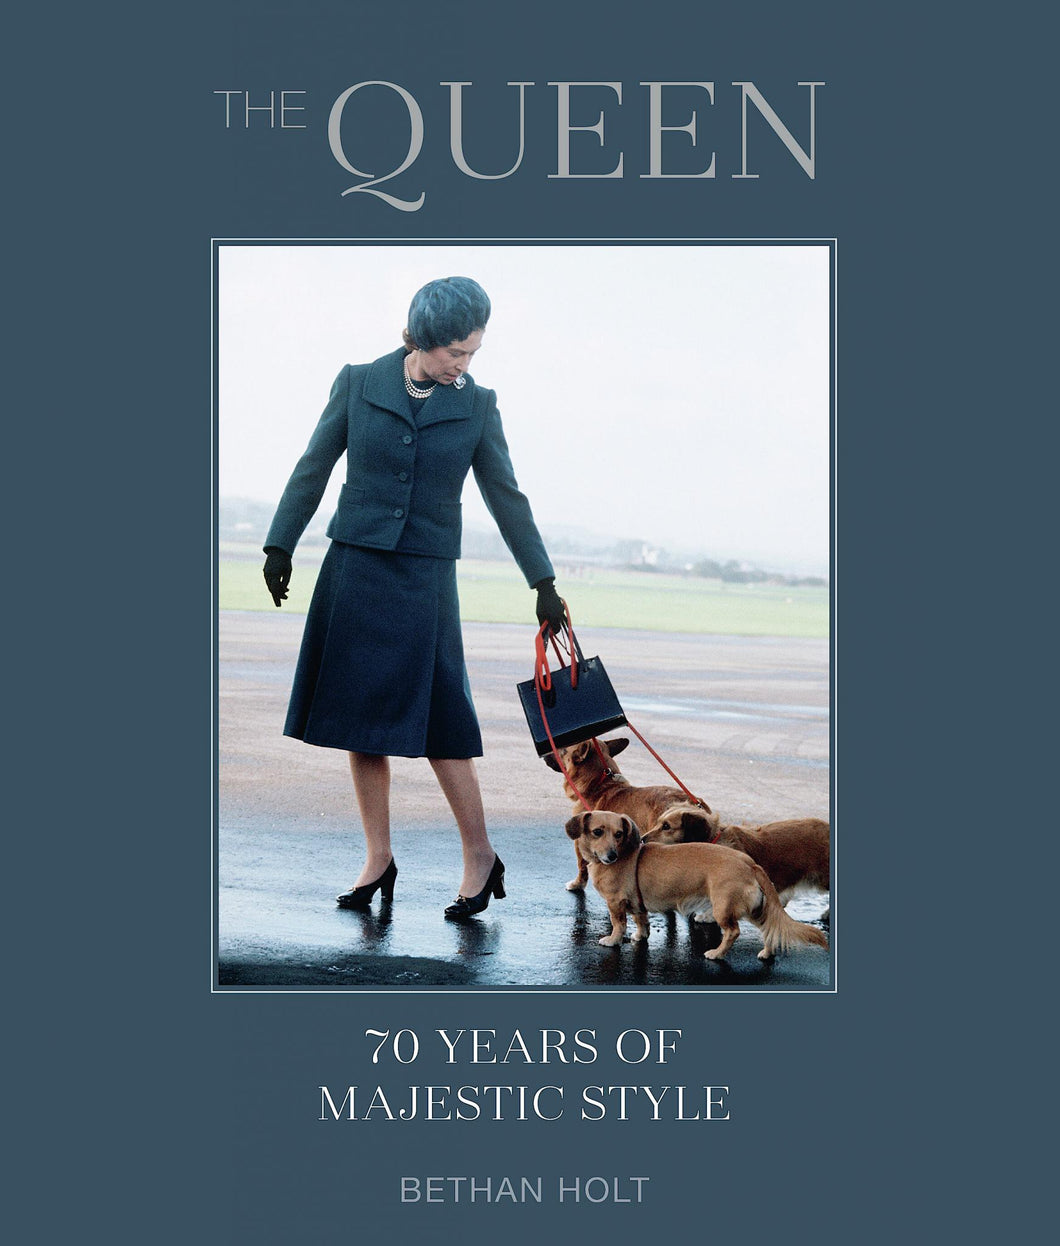 The Queen: 70 Years of Majestic Style